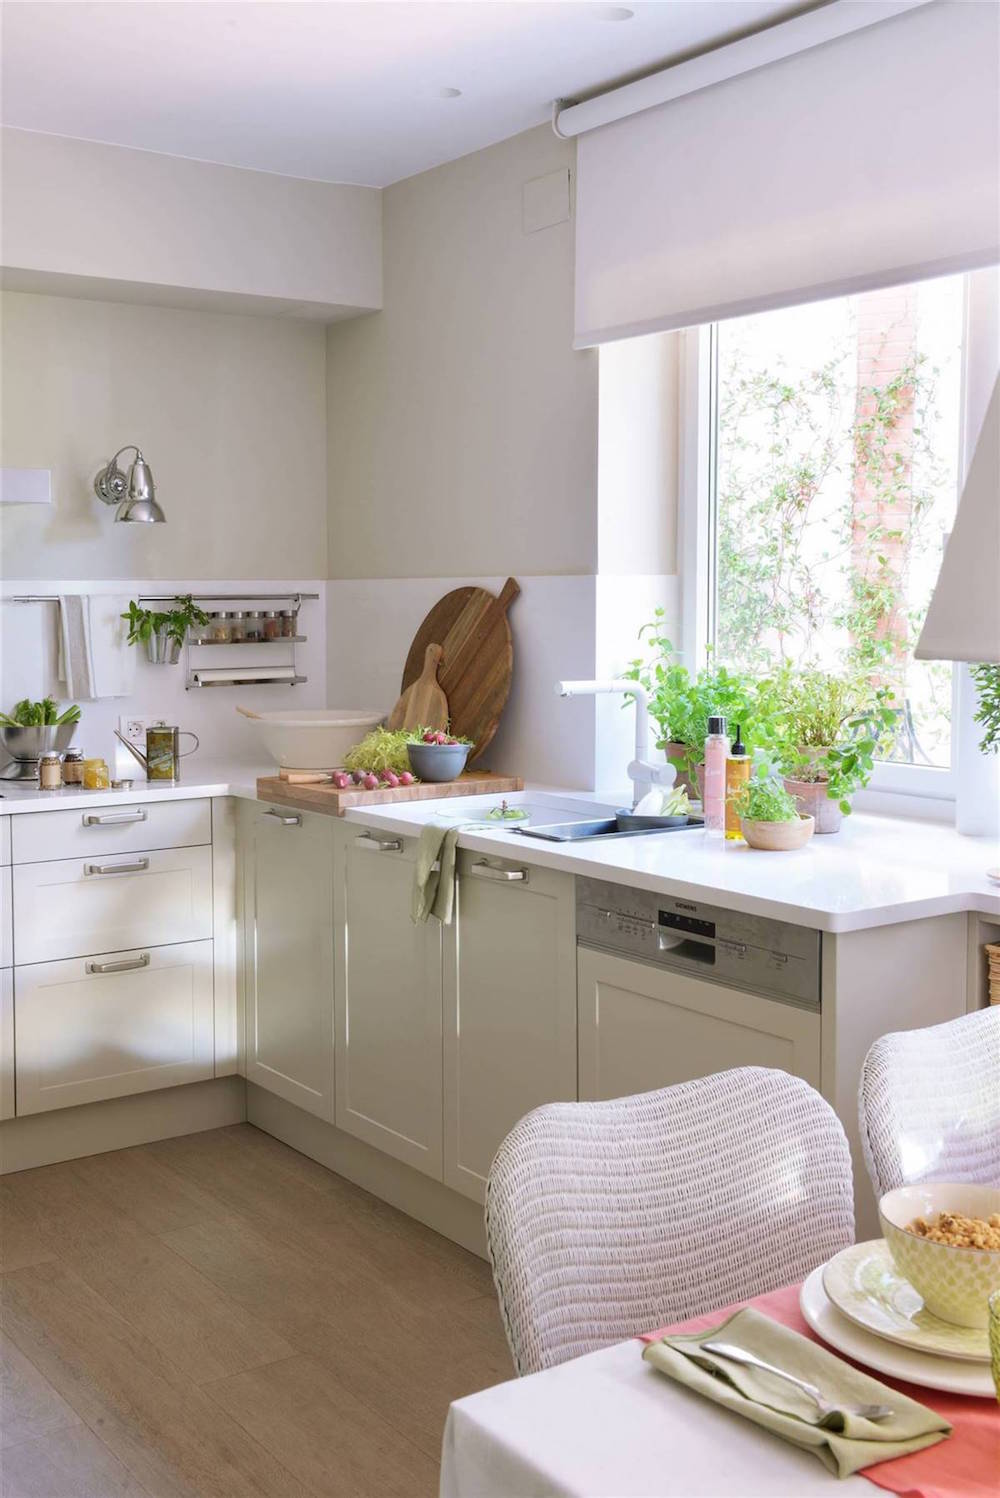 How To Plan a Kitchen: Key Considerations | L'Essenziale